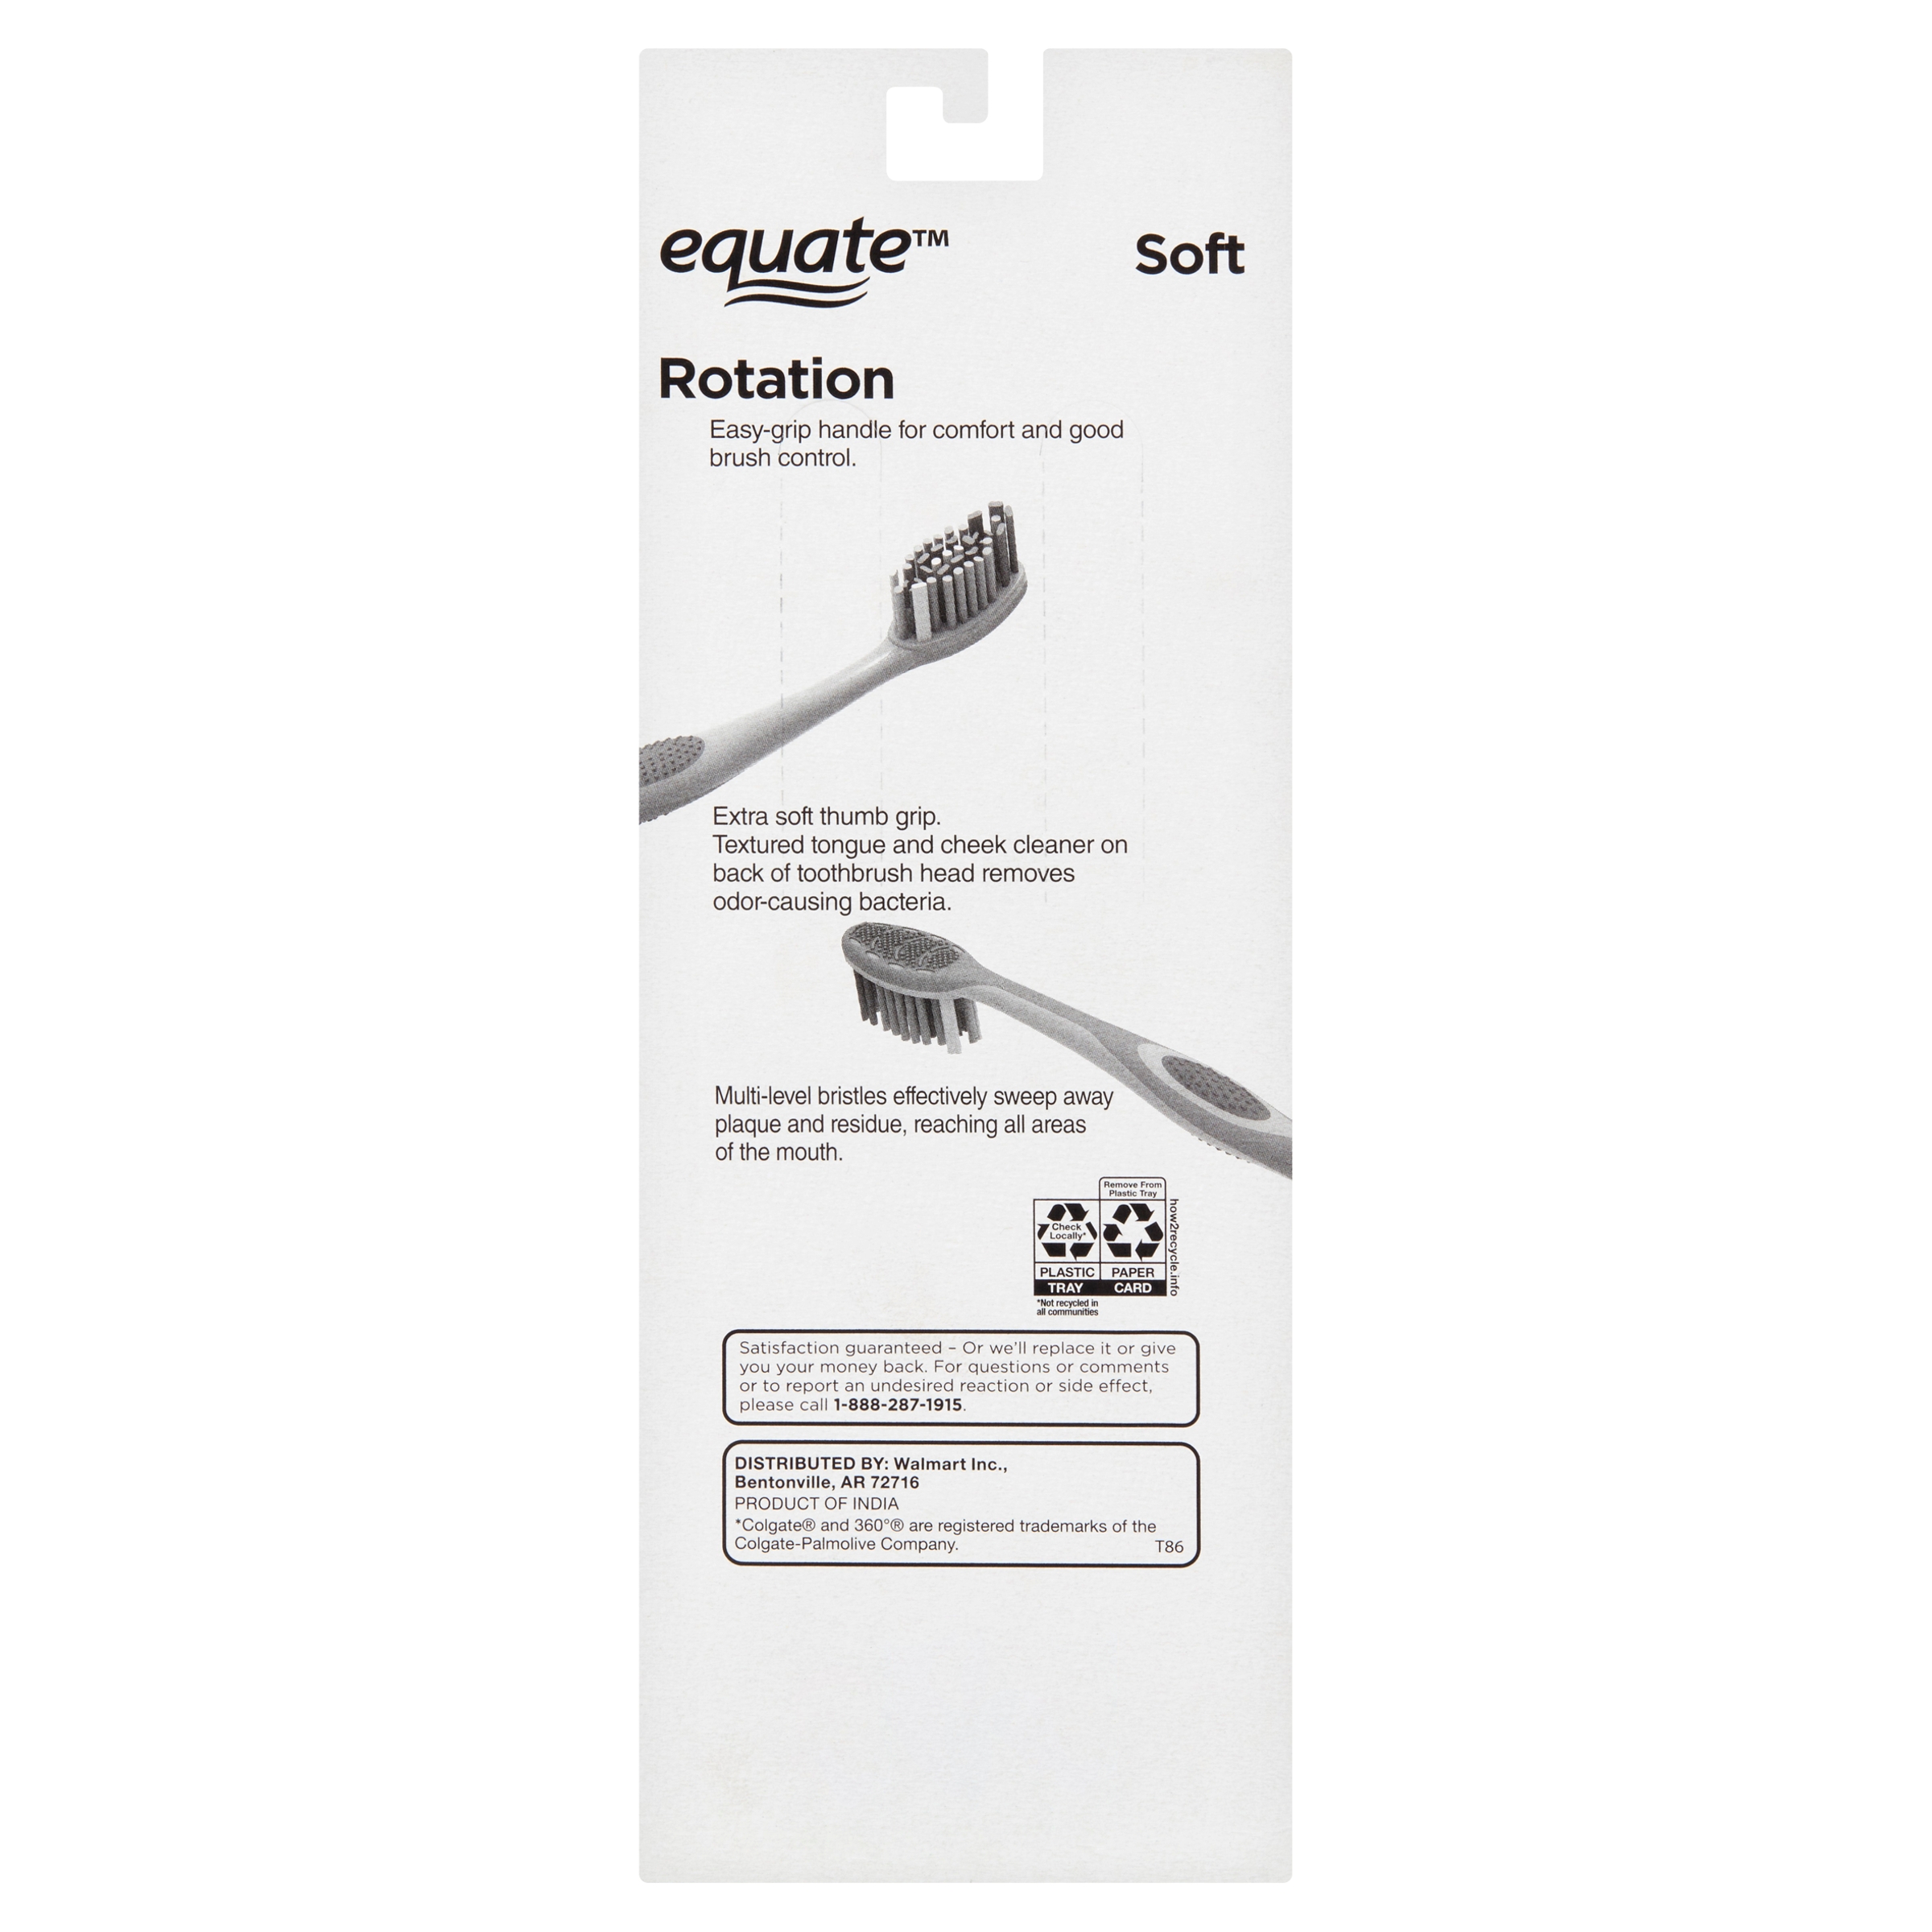 Equate Rotation, Adult Manual Soft Bristle Toothbrush with Tongue and Cheek Cleaner, 4 Count - image 7 of 9